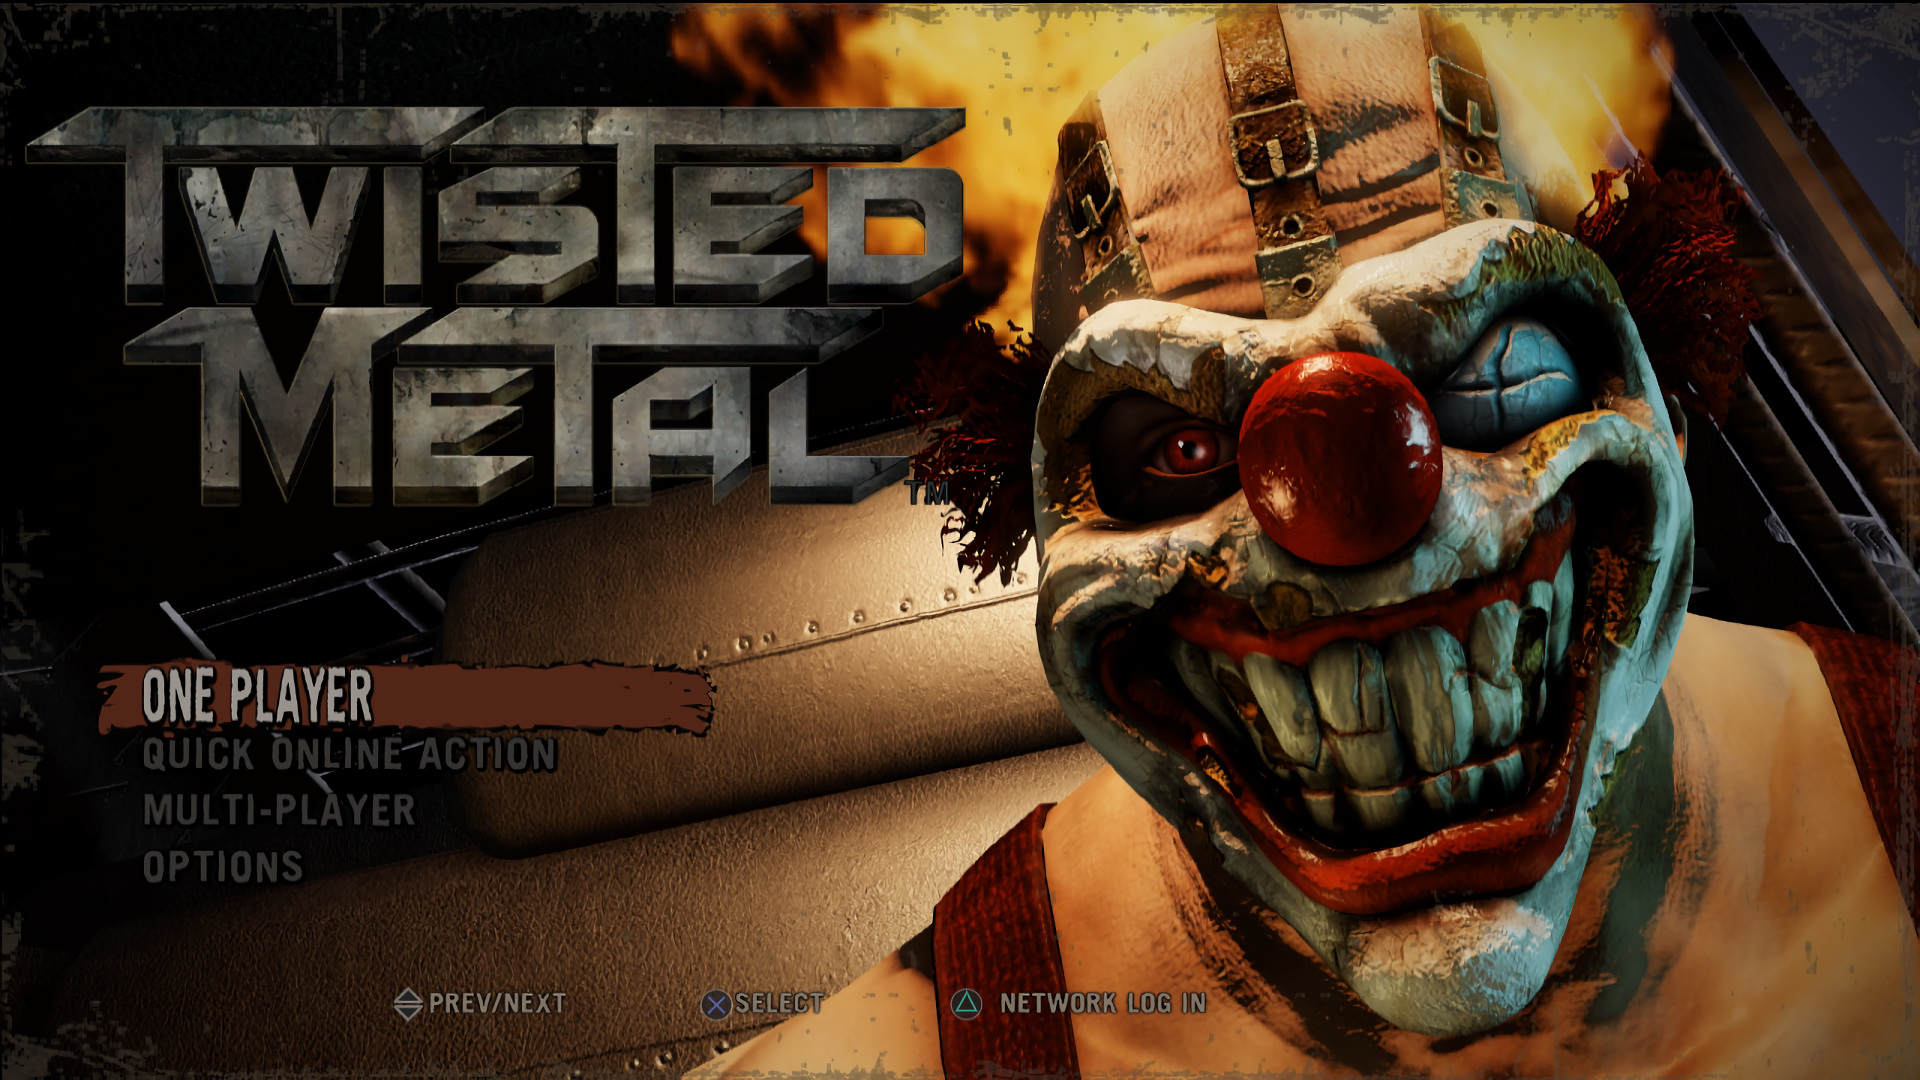 Why is twisted metal rated ma